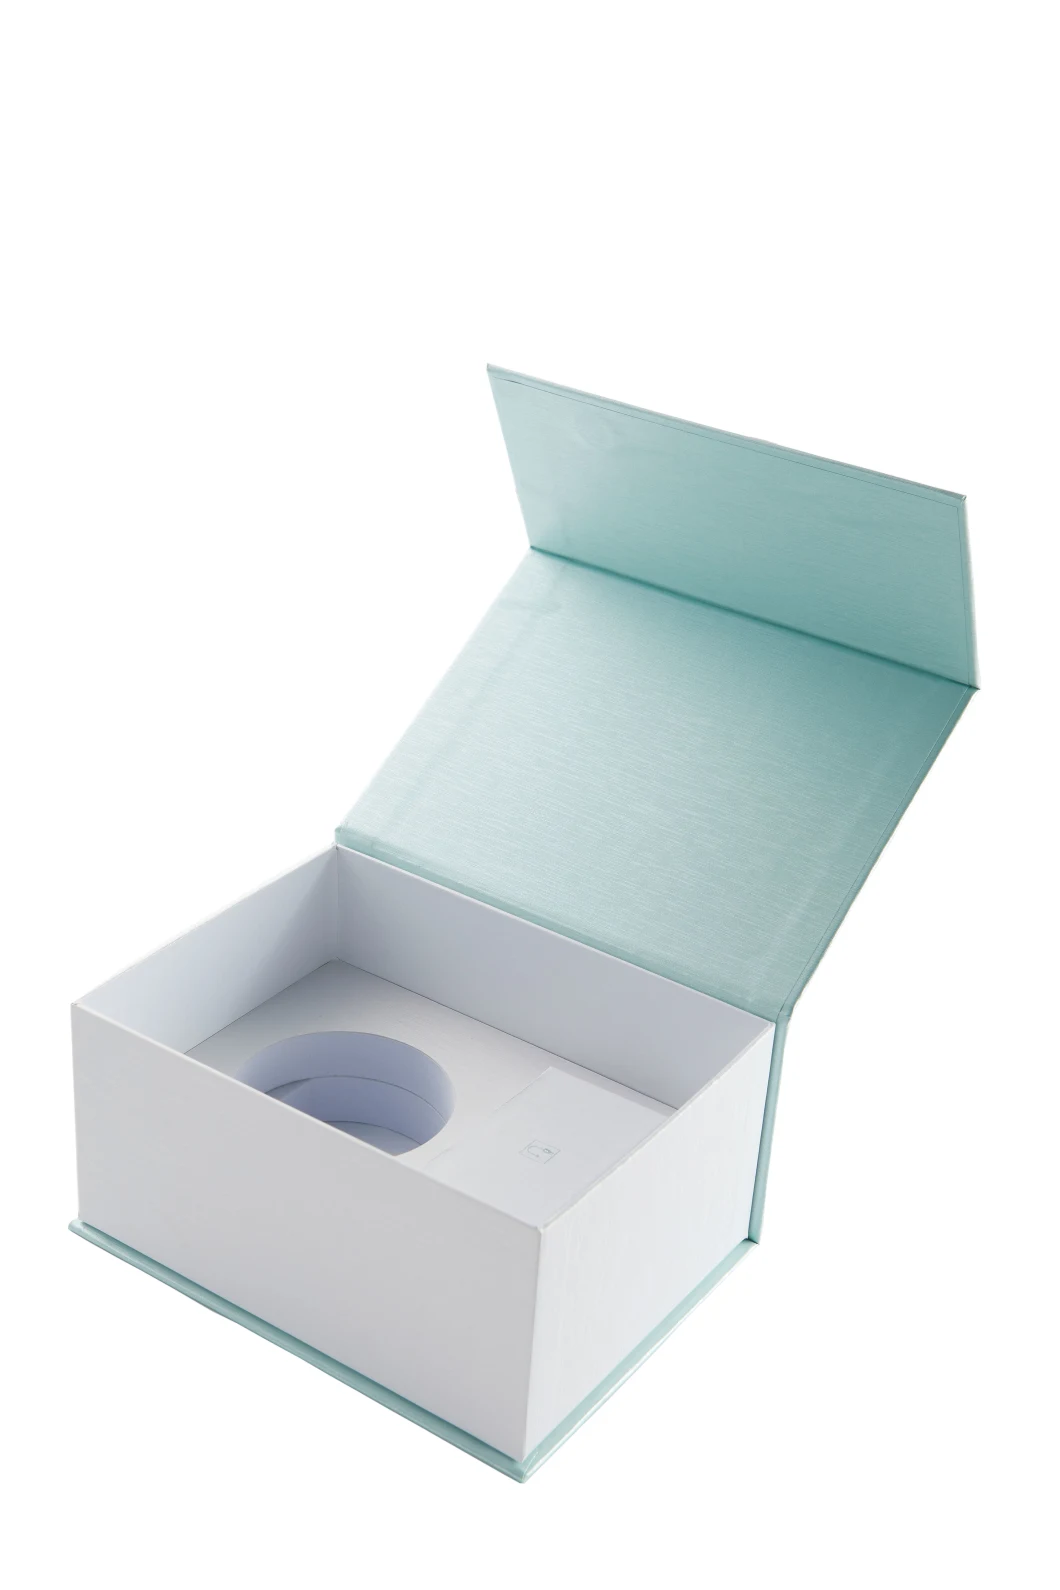 Fancy Paper Box Gift Box Cardboard Book-Shaped Packaging Box of Low Price with EVA Foam